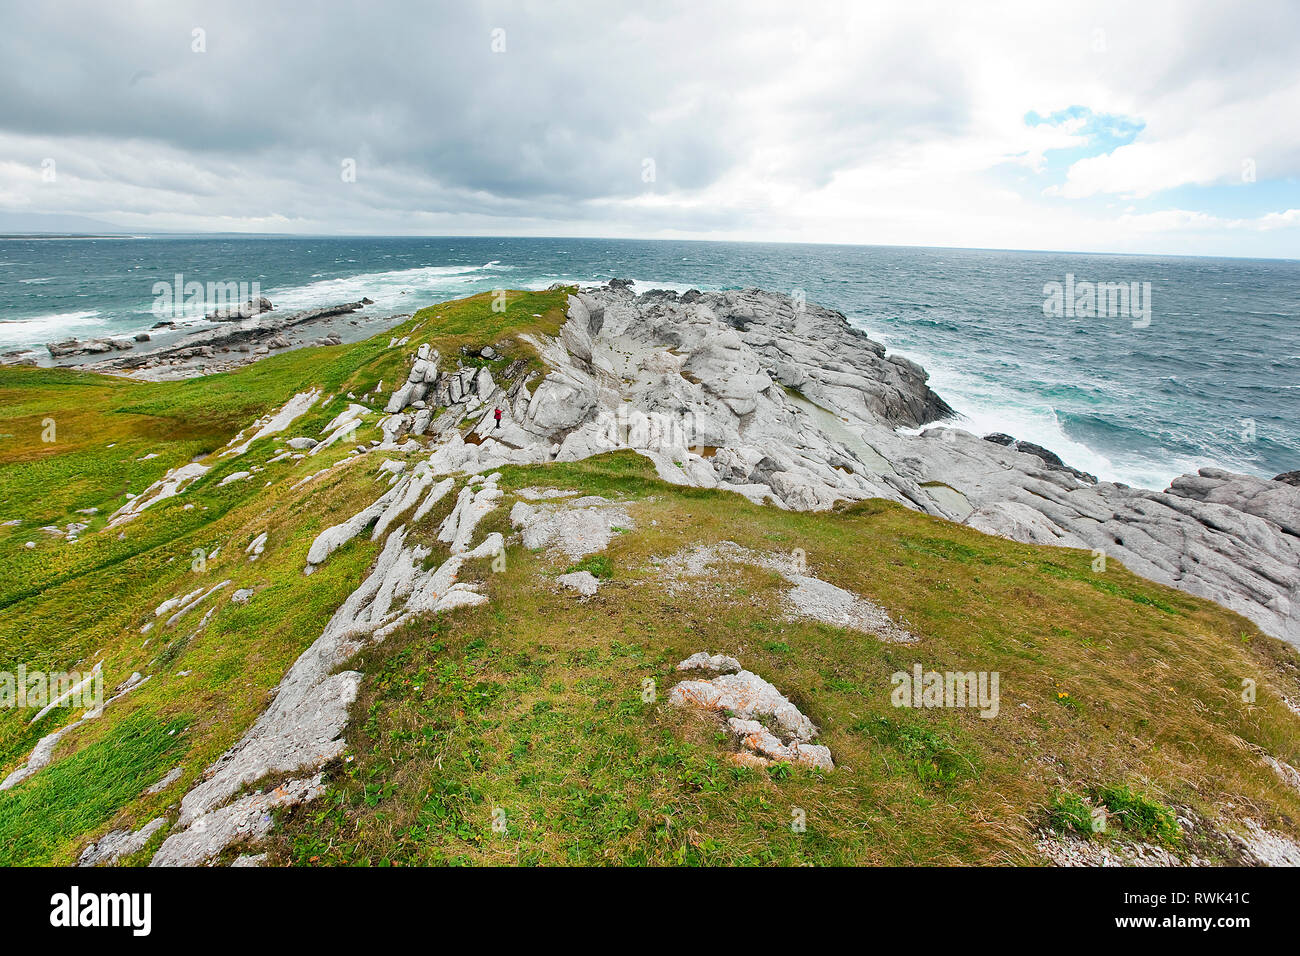 Cambrian and Ordovicia era rock formations extending into the Gulf of St. Lawrence at the southwestern end of the Lighthouse Trail on the Cow Head Peninsula, Cow Head, Western Newfoundland, Canada Stock Photo